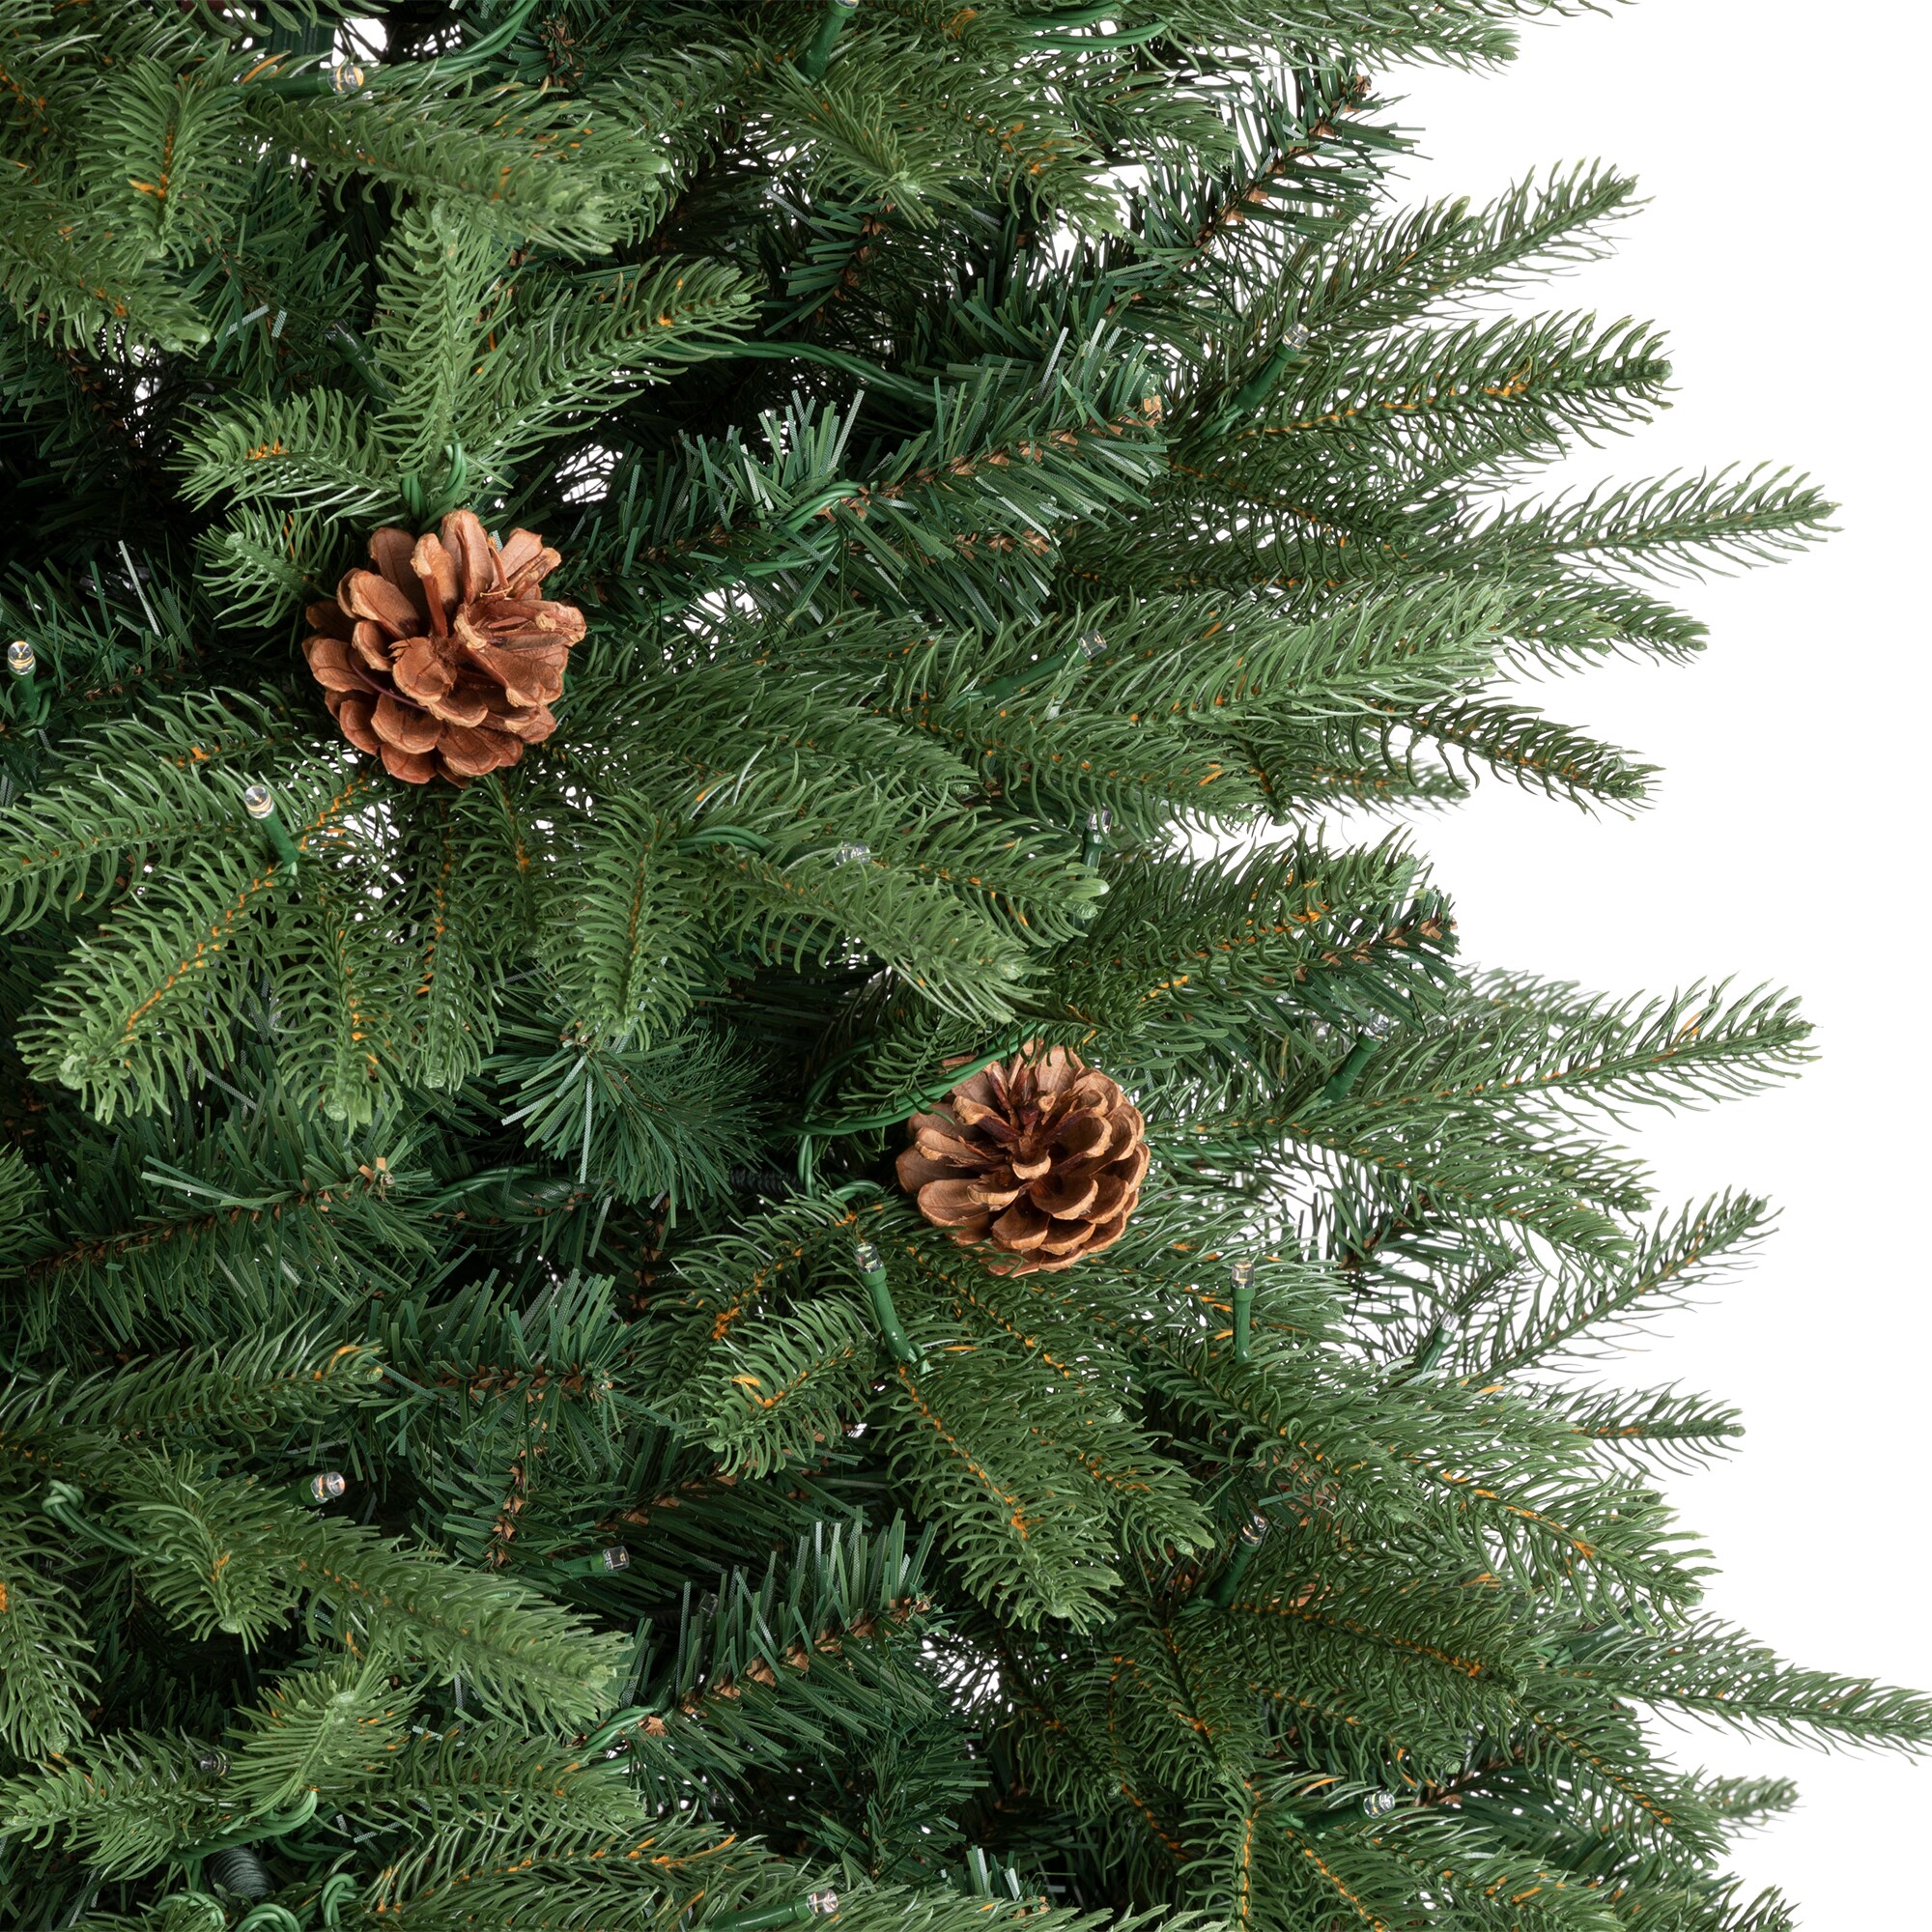 Triumph Tree, Christmas Tree, Forest frosted, 75 cm